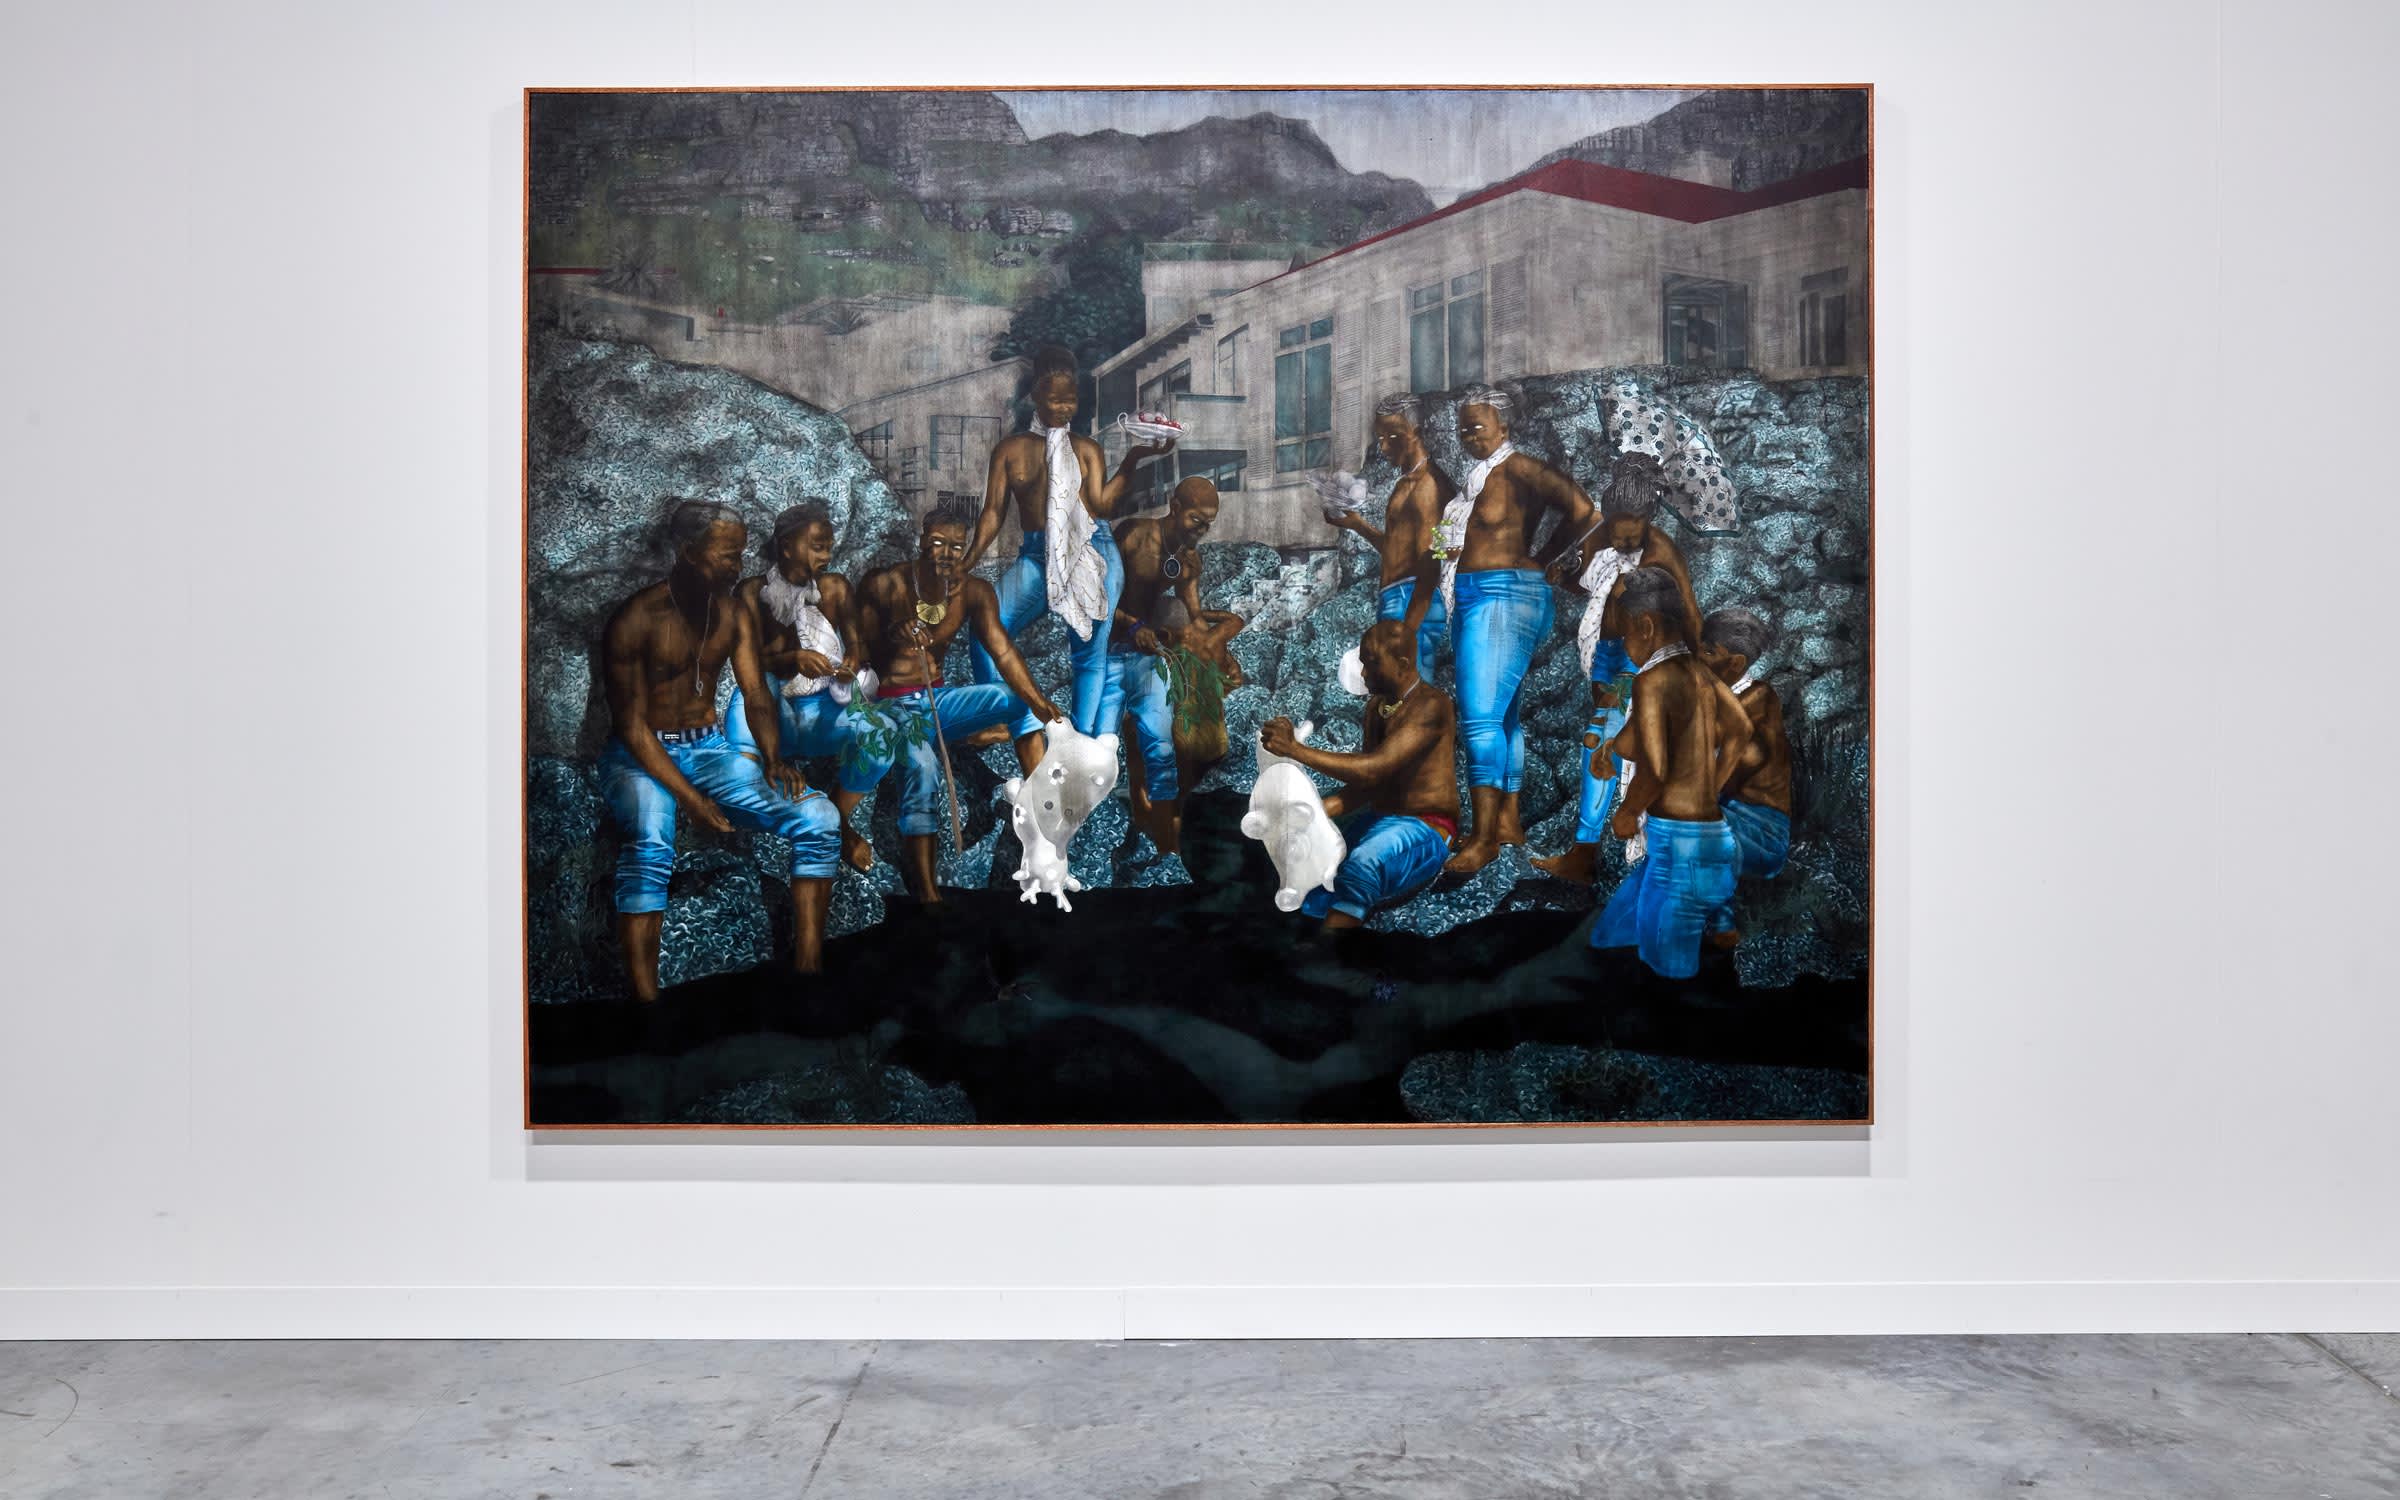 Cinga Samson, Izilo Zomlambo 4, 2019, presented by blank projects in the Nova sector.